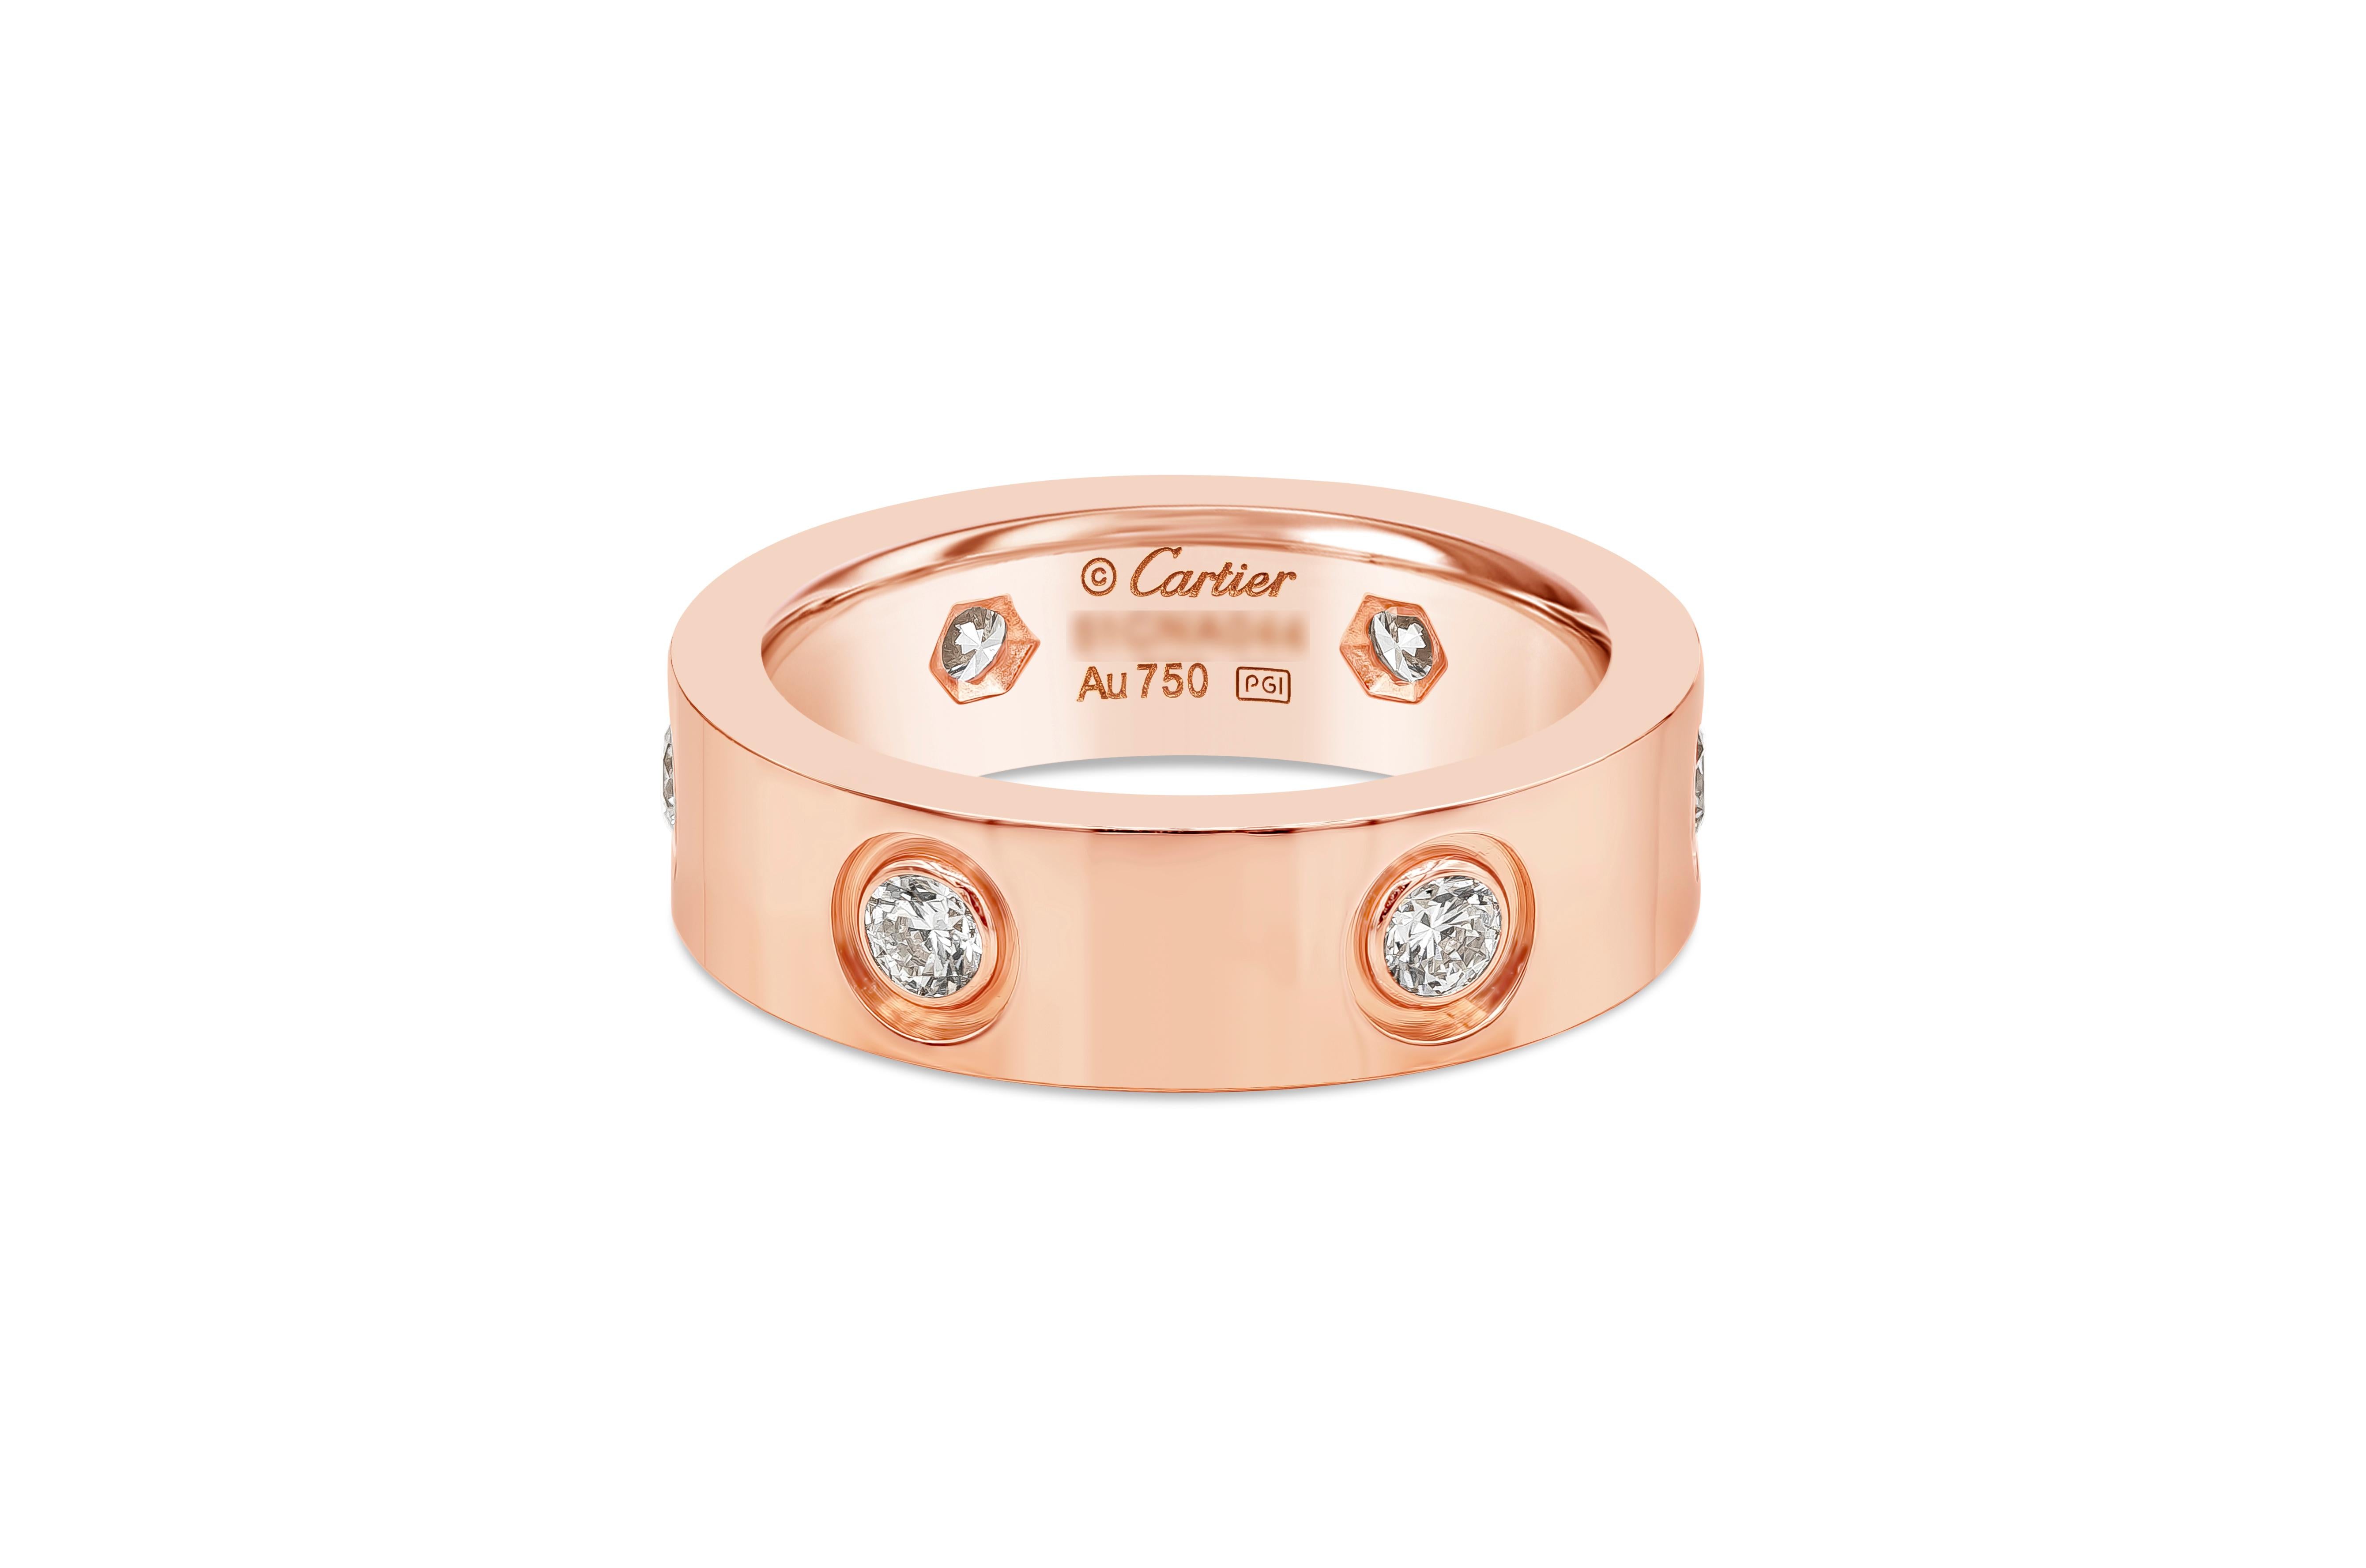 A classic Love ring made and signed by Cartier. Set with 6 diamonds in an 18 karat rose gold mounting. Discontinued version. Comes with original box. Size 51. In excellent condition. Lightly polished.